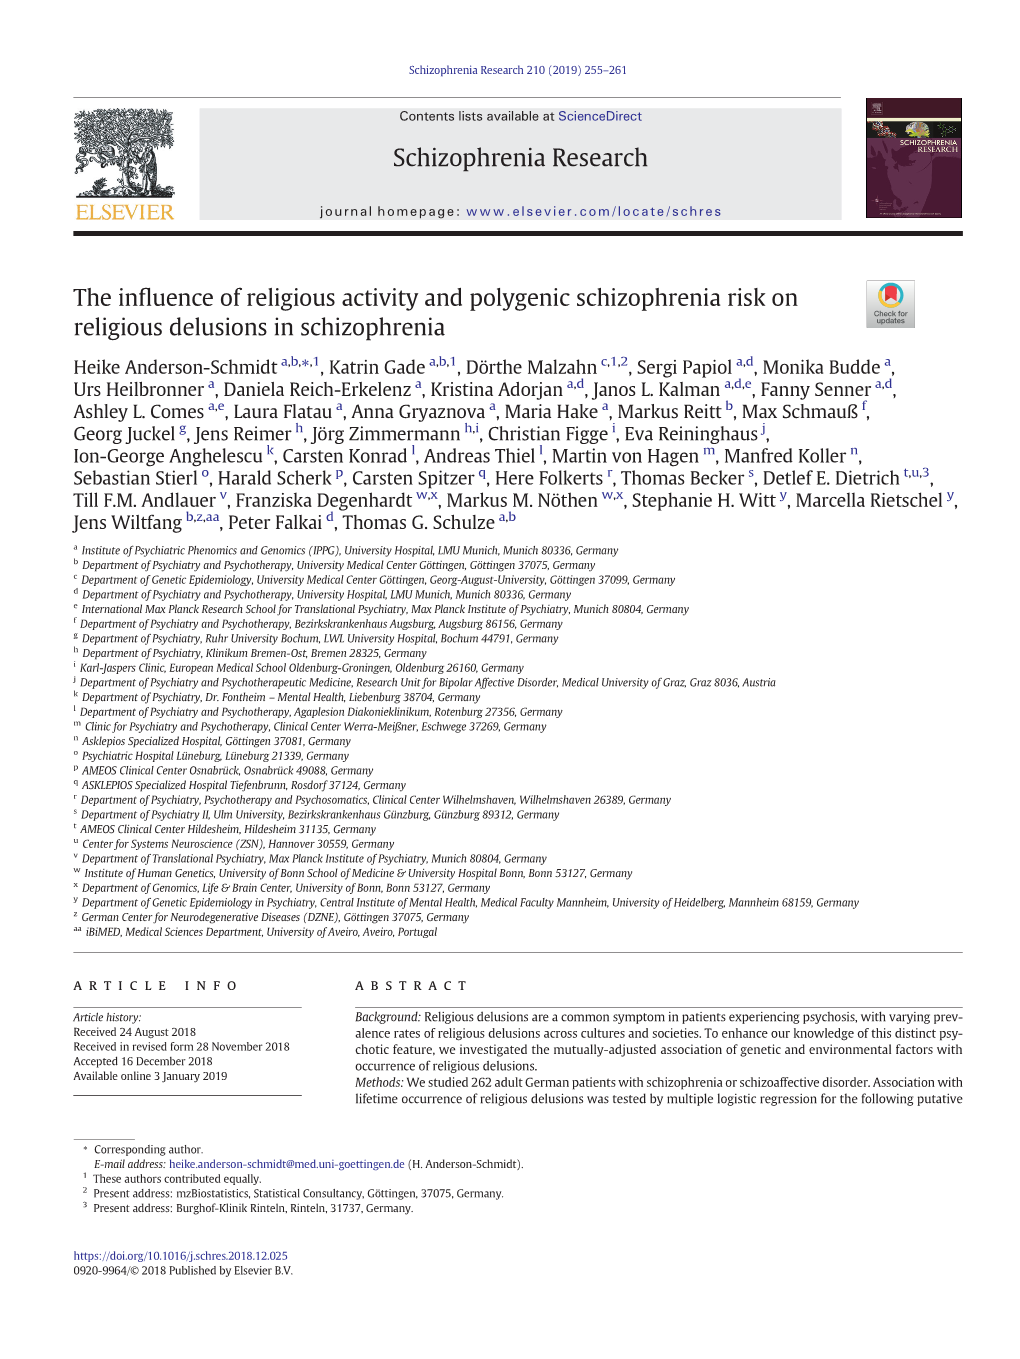 The Influence of Religious Activity and Polygenic Schizophrenia Risk On